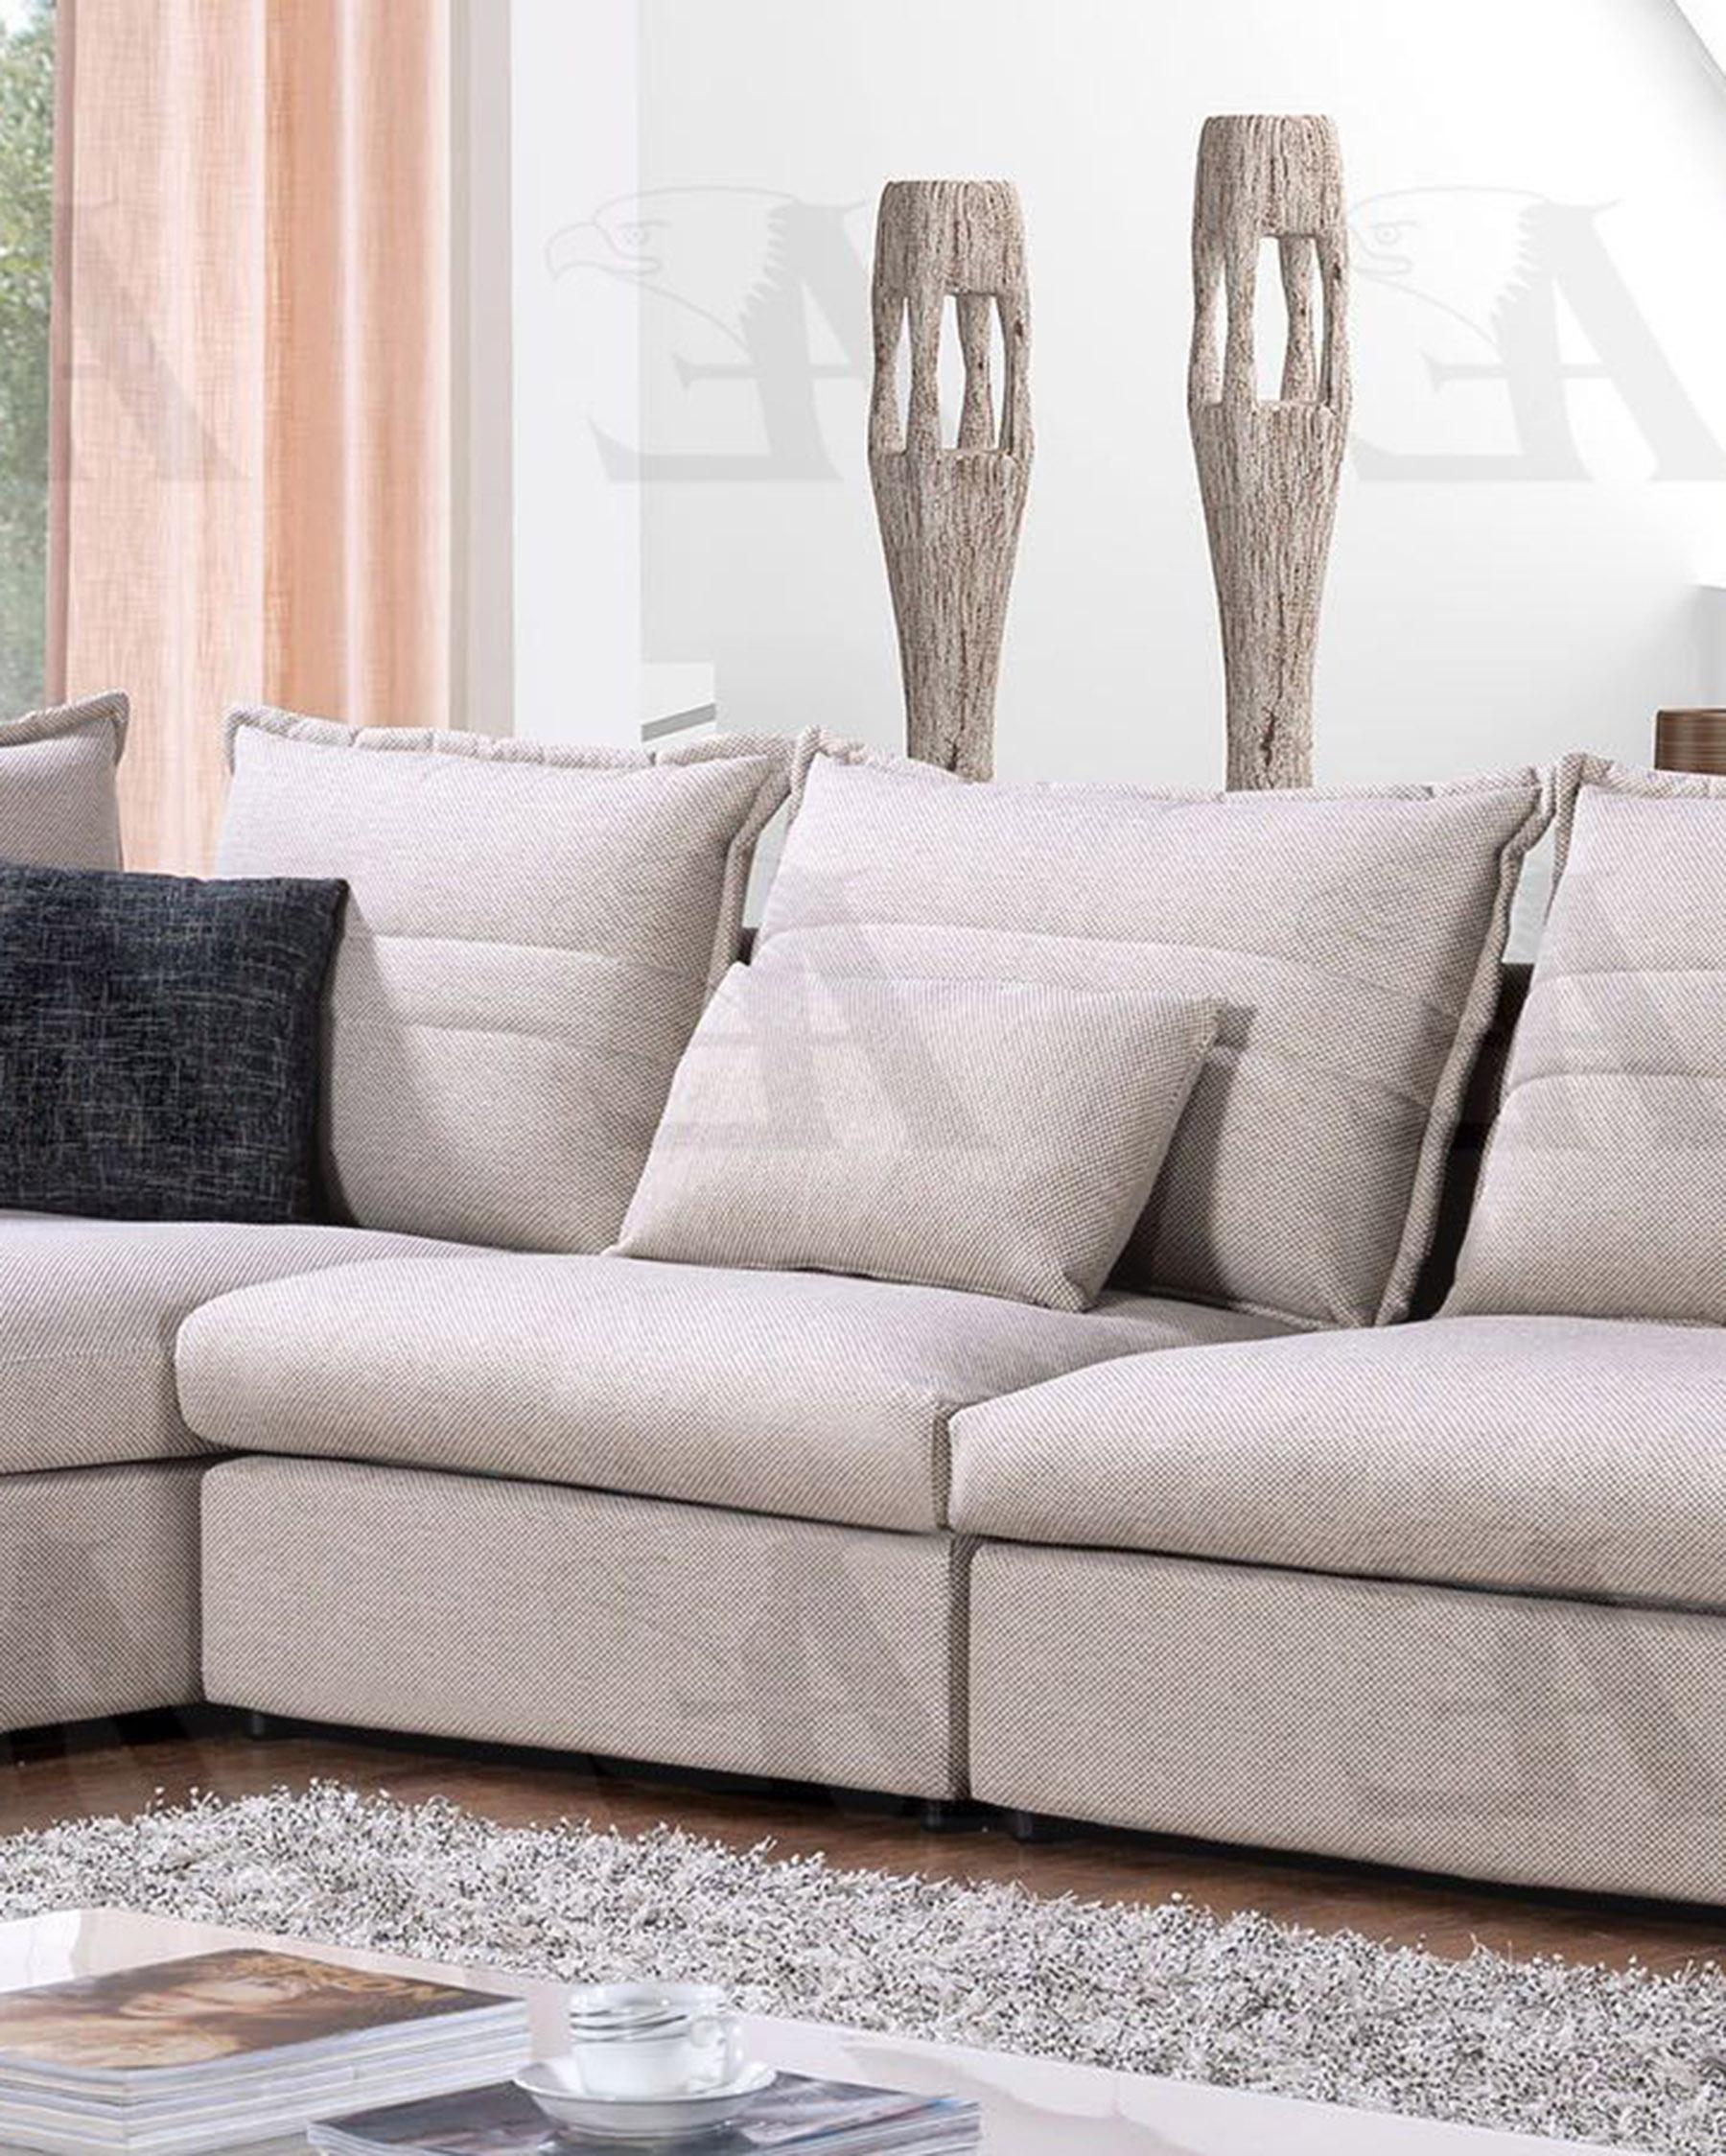 

    
AE-L2319 Set-3 LHC American Eagle Furniture AE-L2319 Gray Fabric Tufted Sectional Sofa Chaise and Chair Set Left Hand Chase 3Pcs
